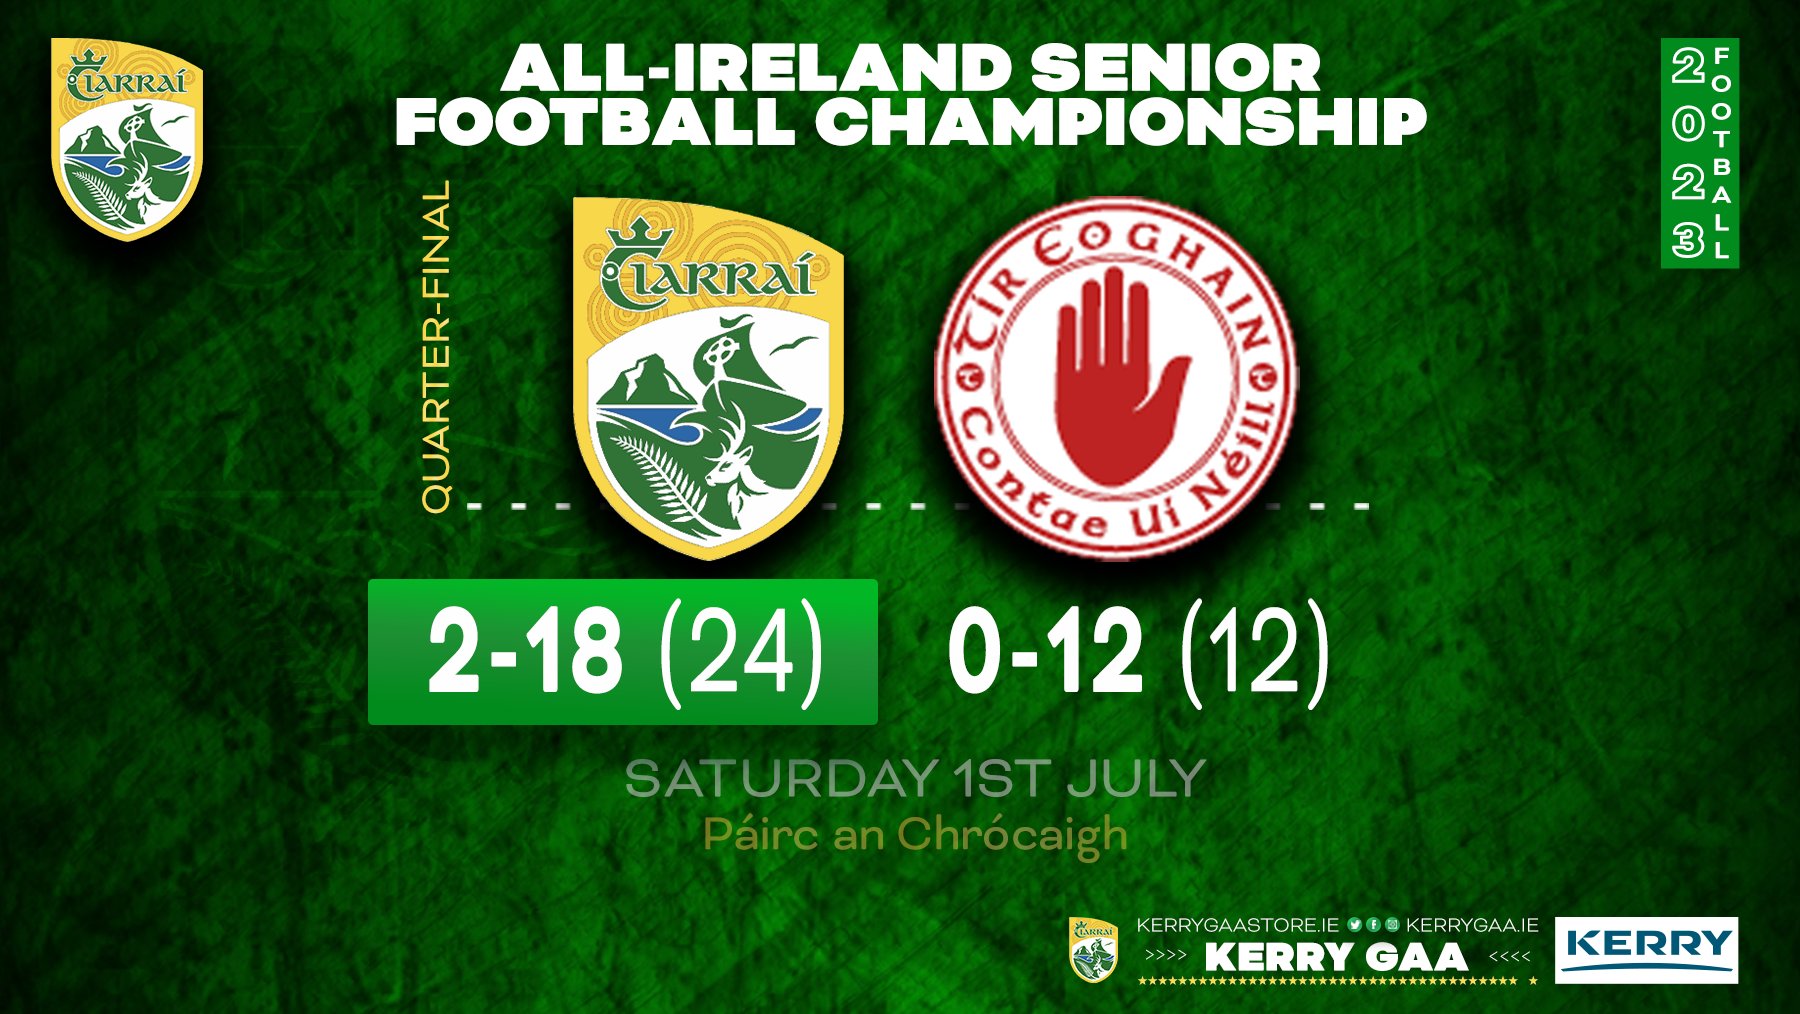 Semi-Final spot secured with win over Tyrone